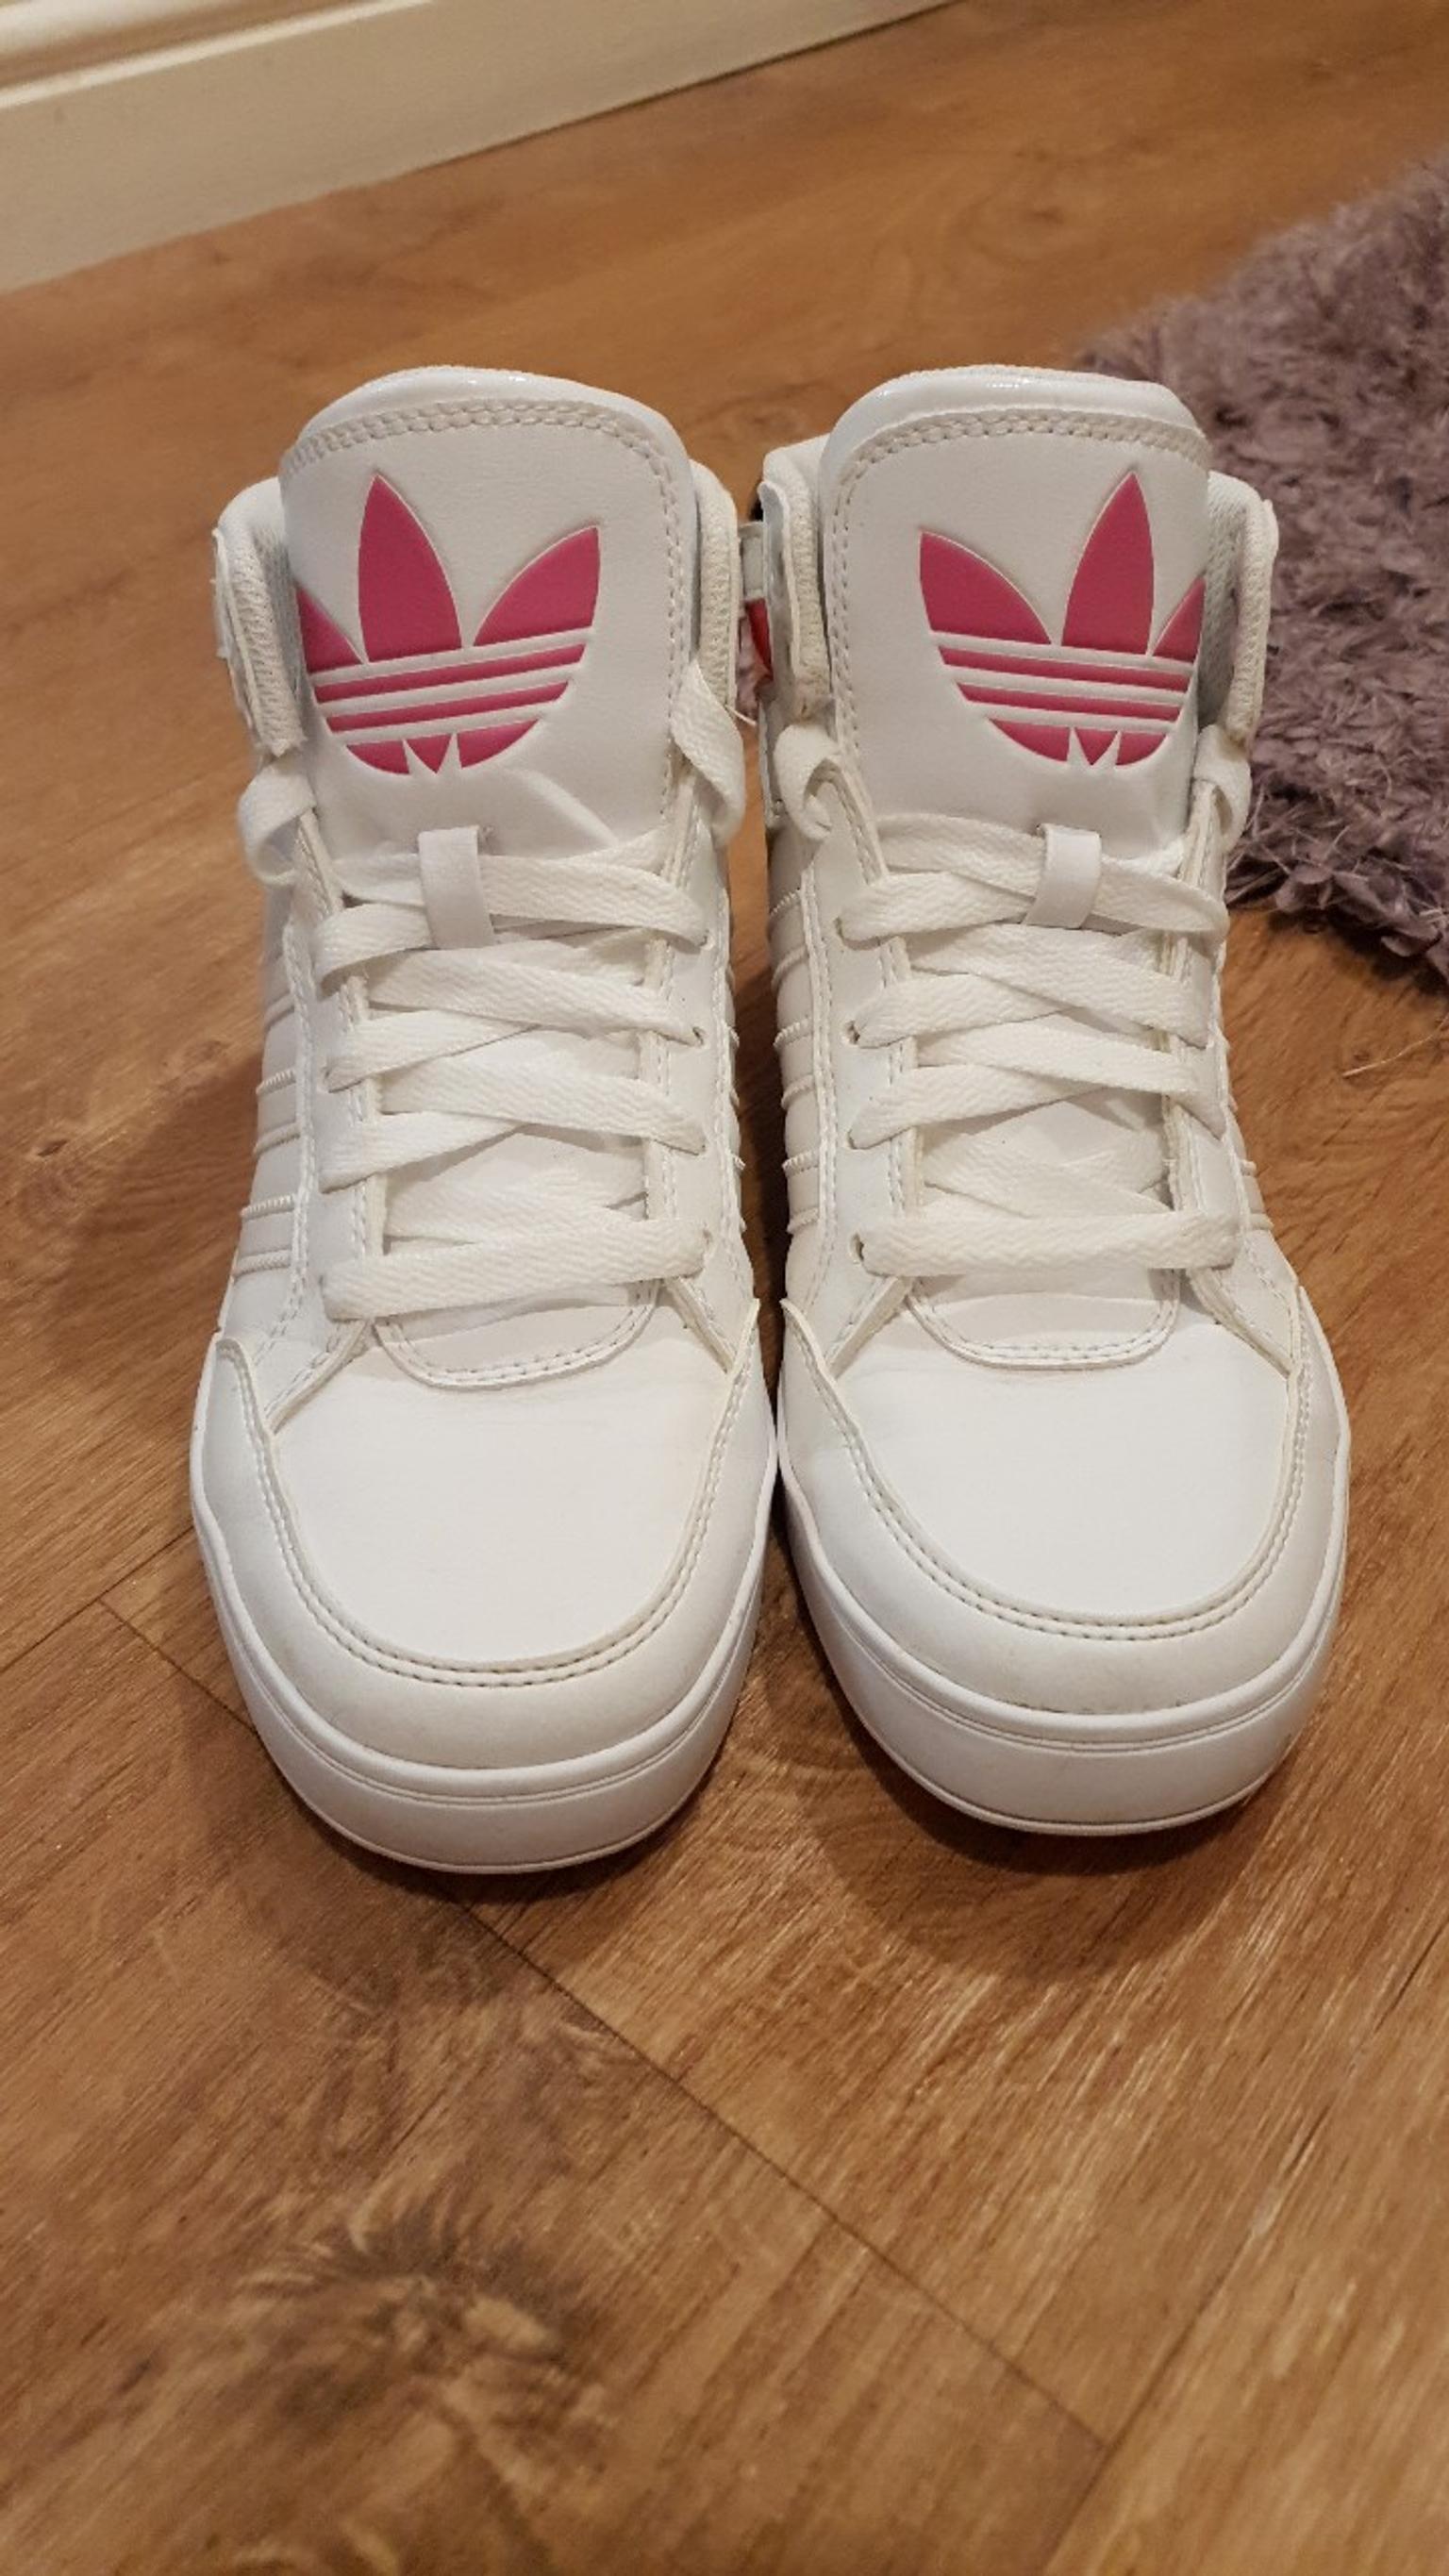 womens adidas high tops size 6